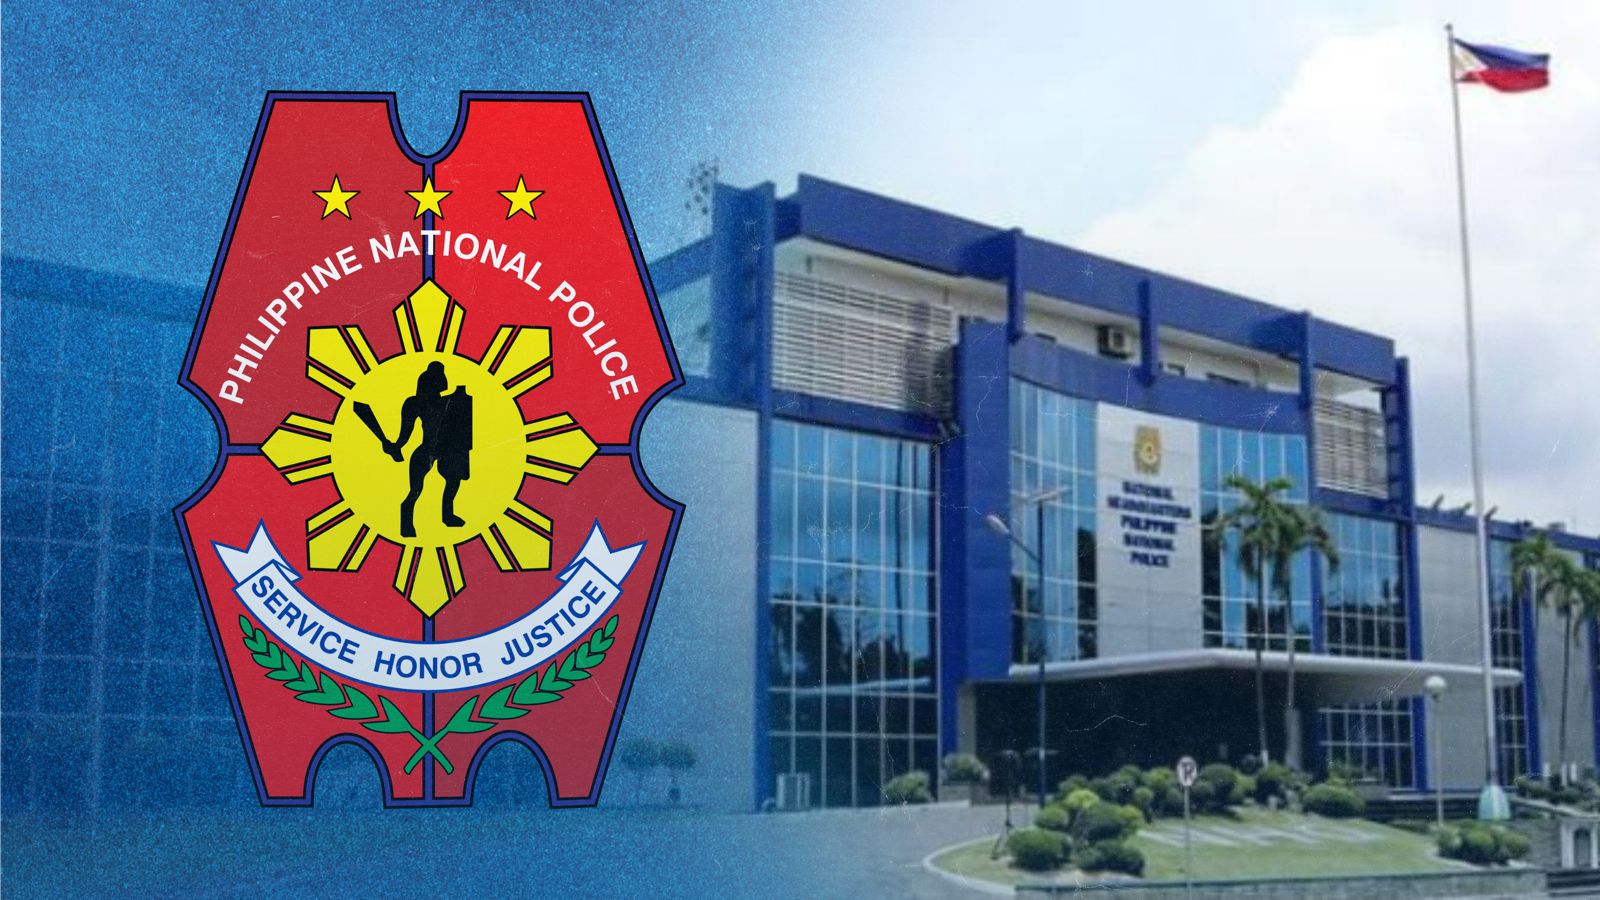 Two members of the Special Action Force (SAF) who allegedly engaged in a moonlighting racket for a Chinese national were released from police custody but will be placed under restrictive custody at their unit’s headquarters, according to the Philippine National Police (PNP).